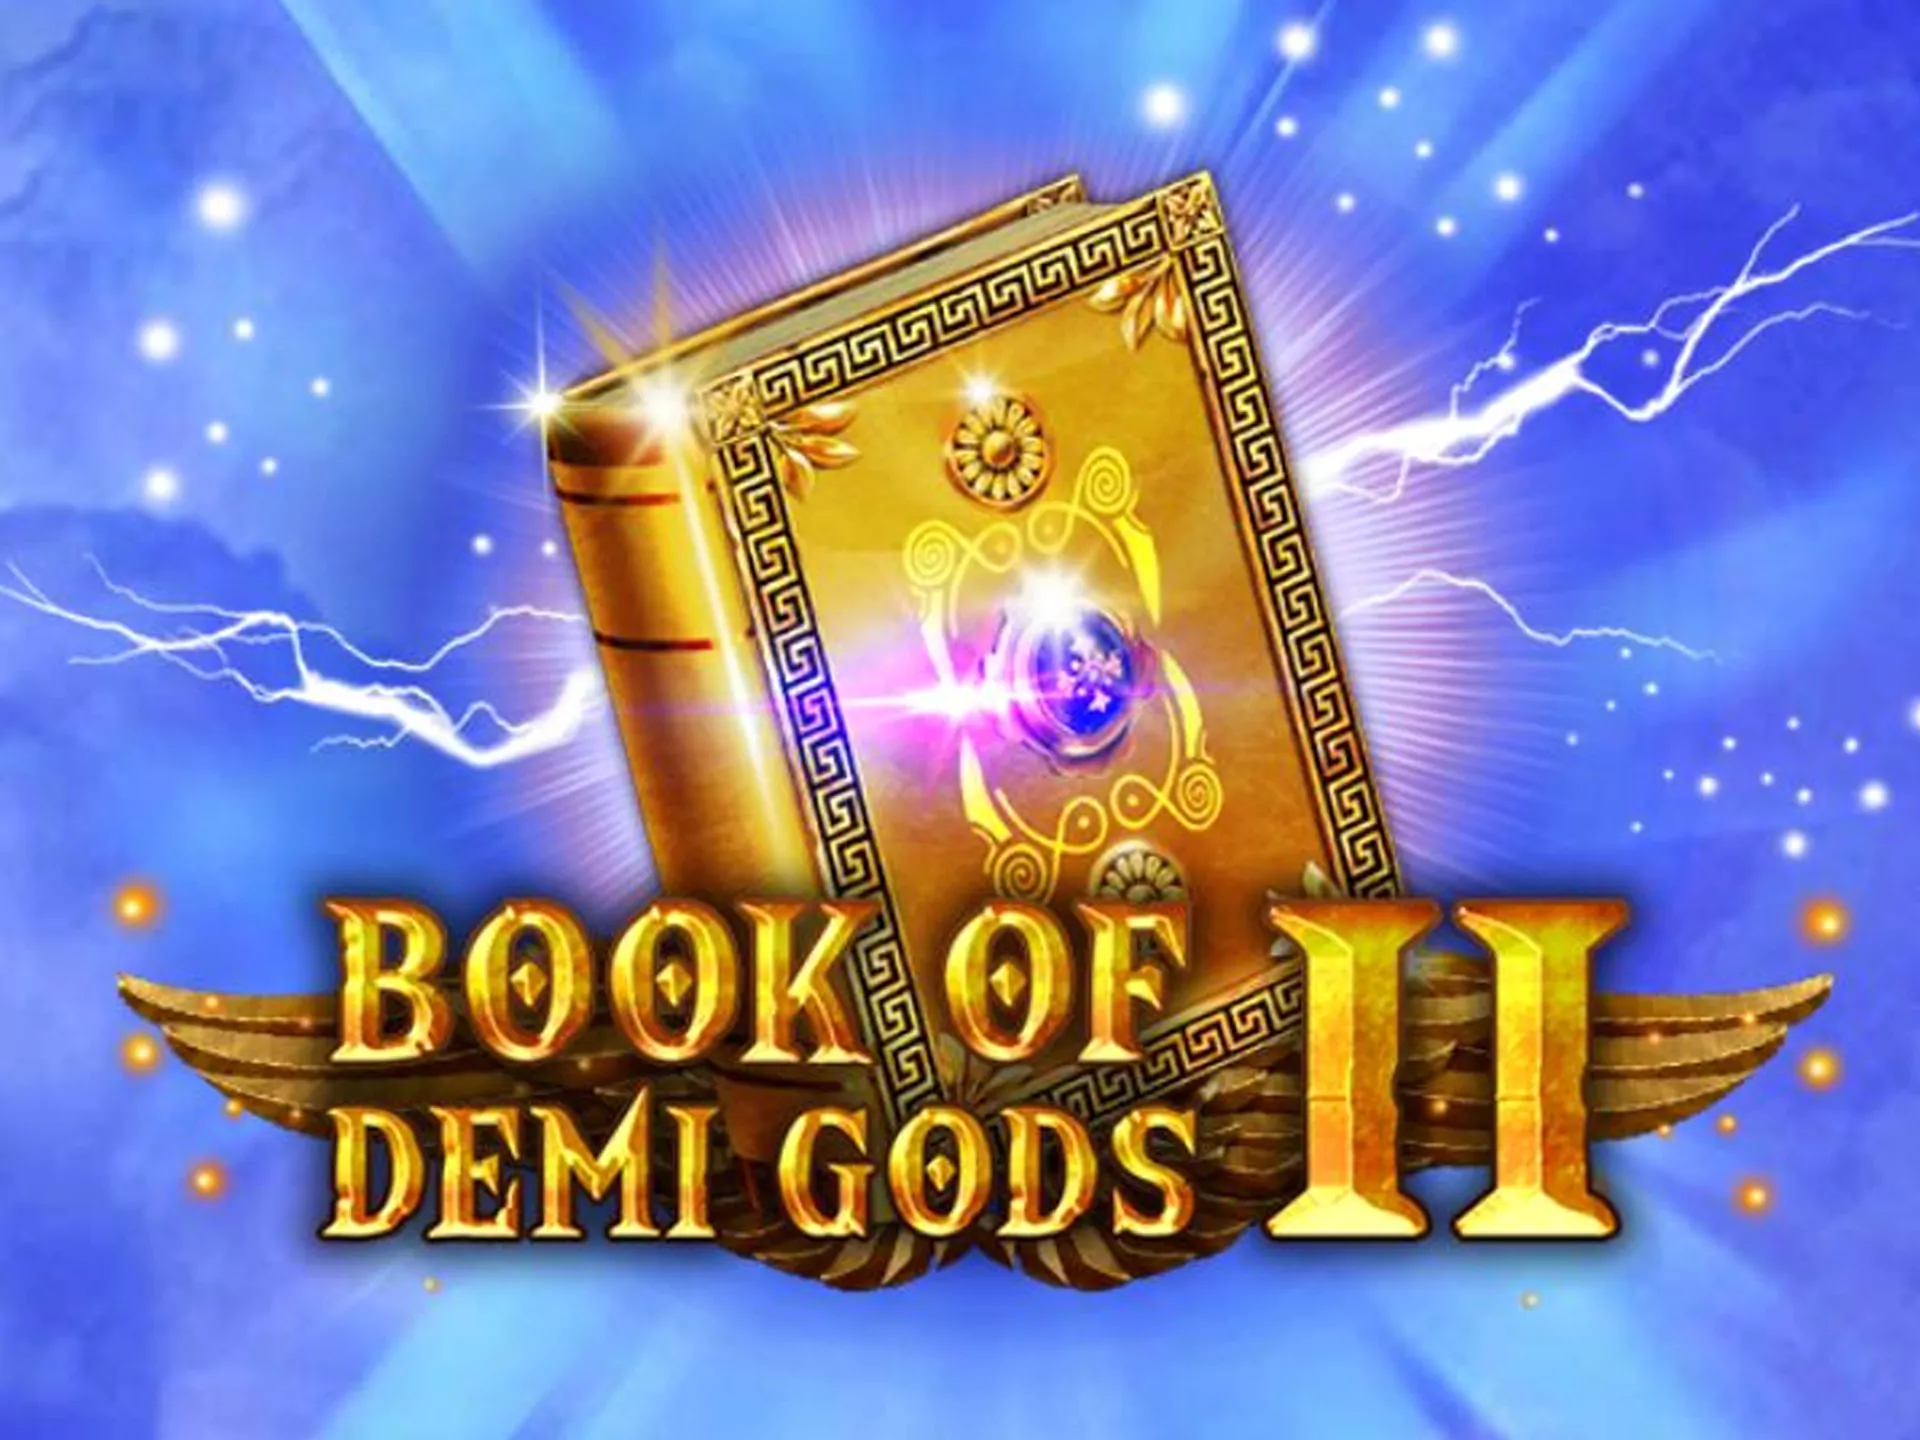 Play Book of Demi Gods 2 and win big prizes.